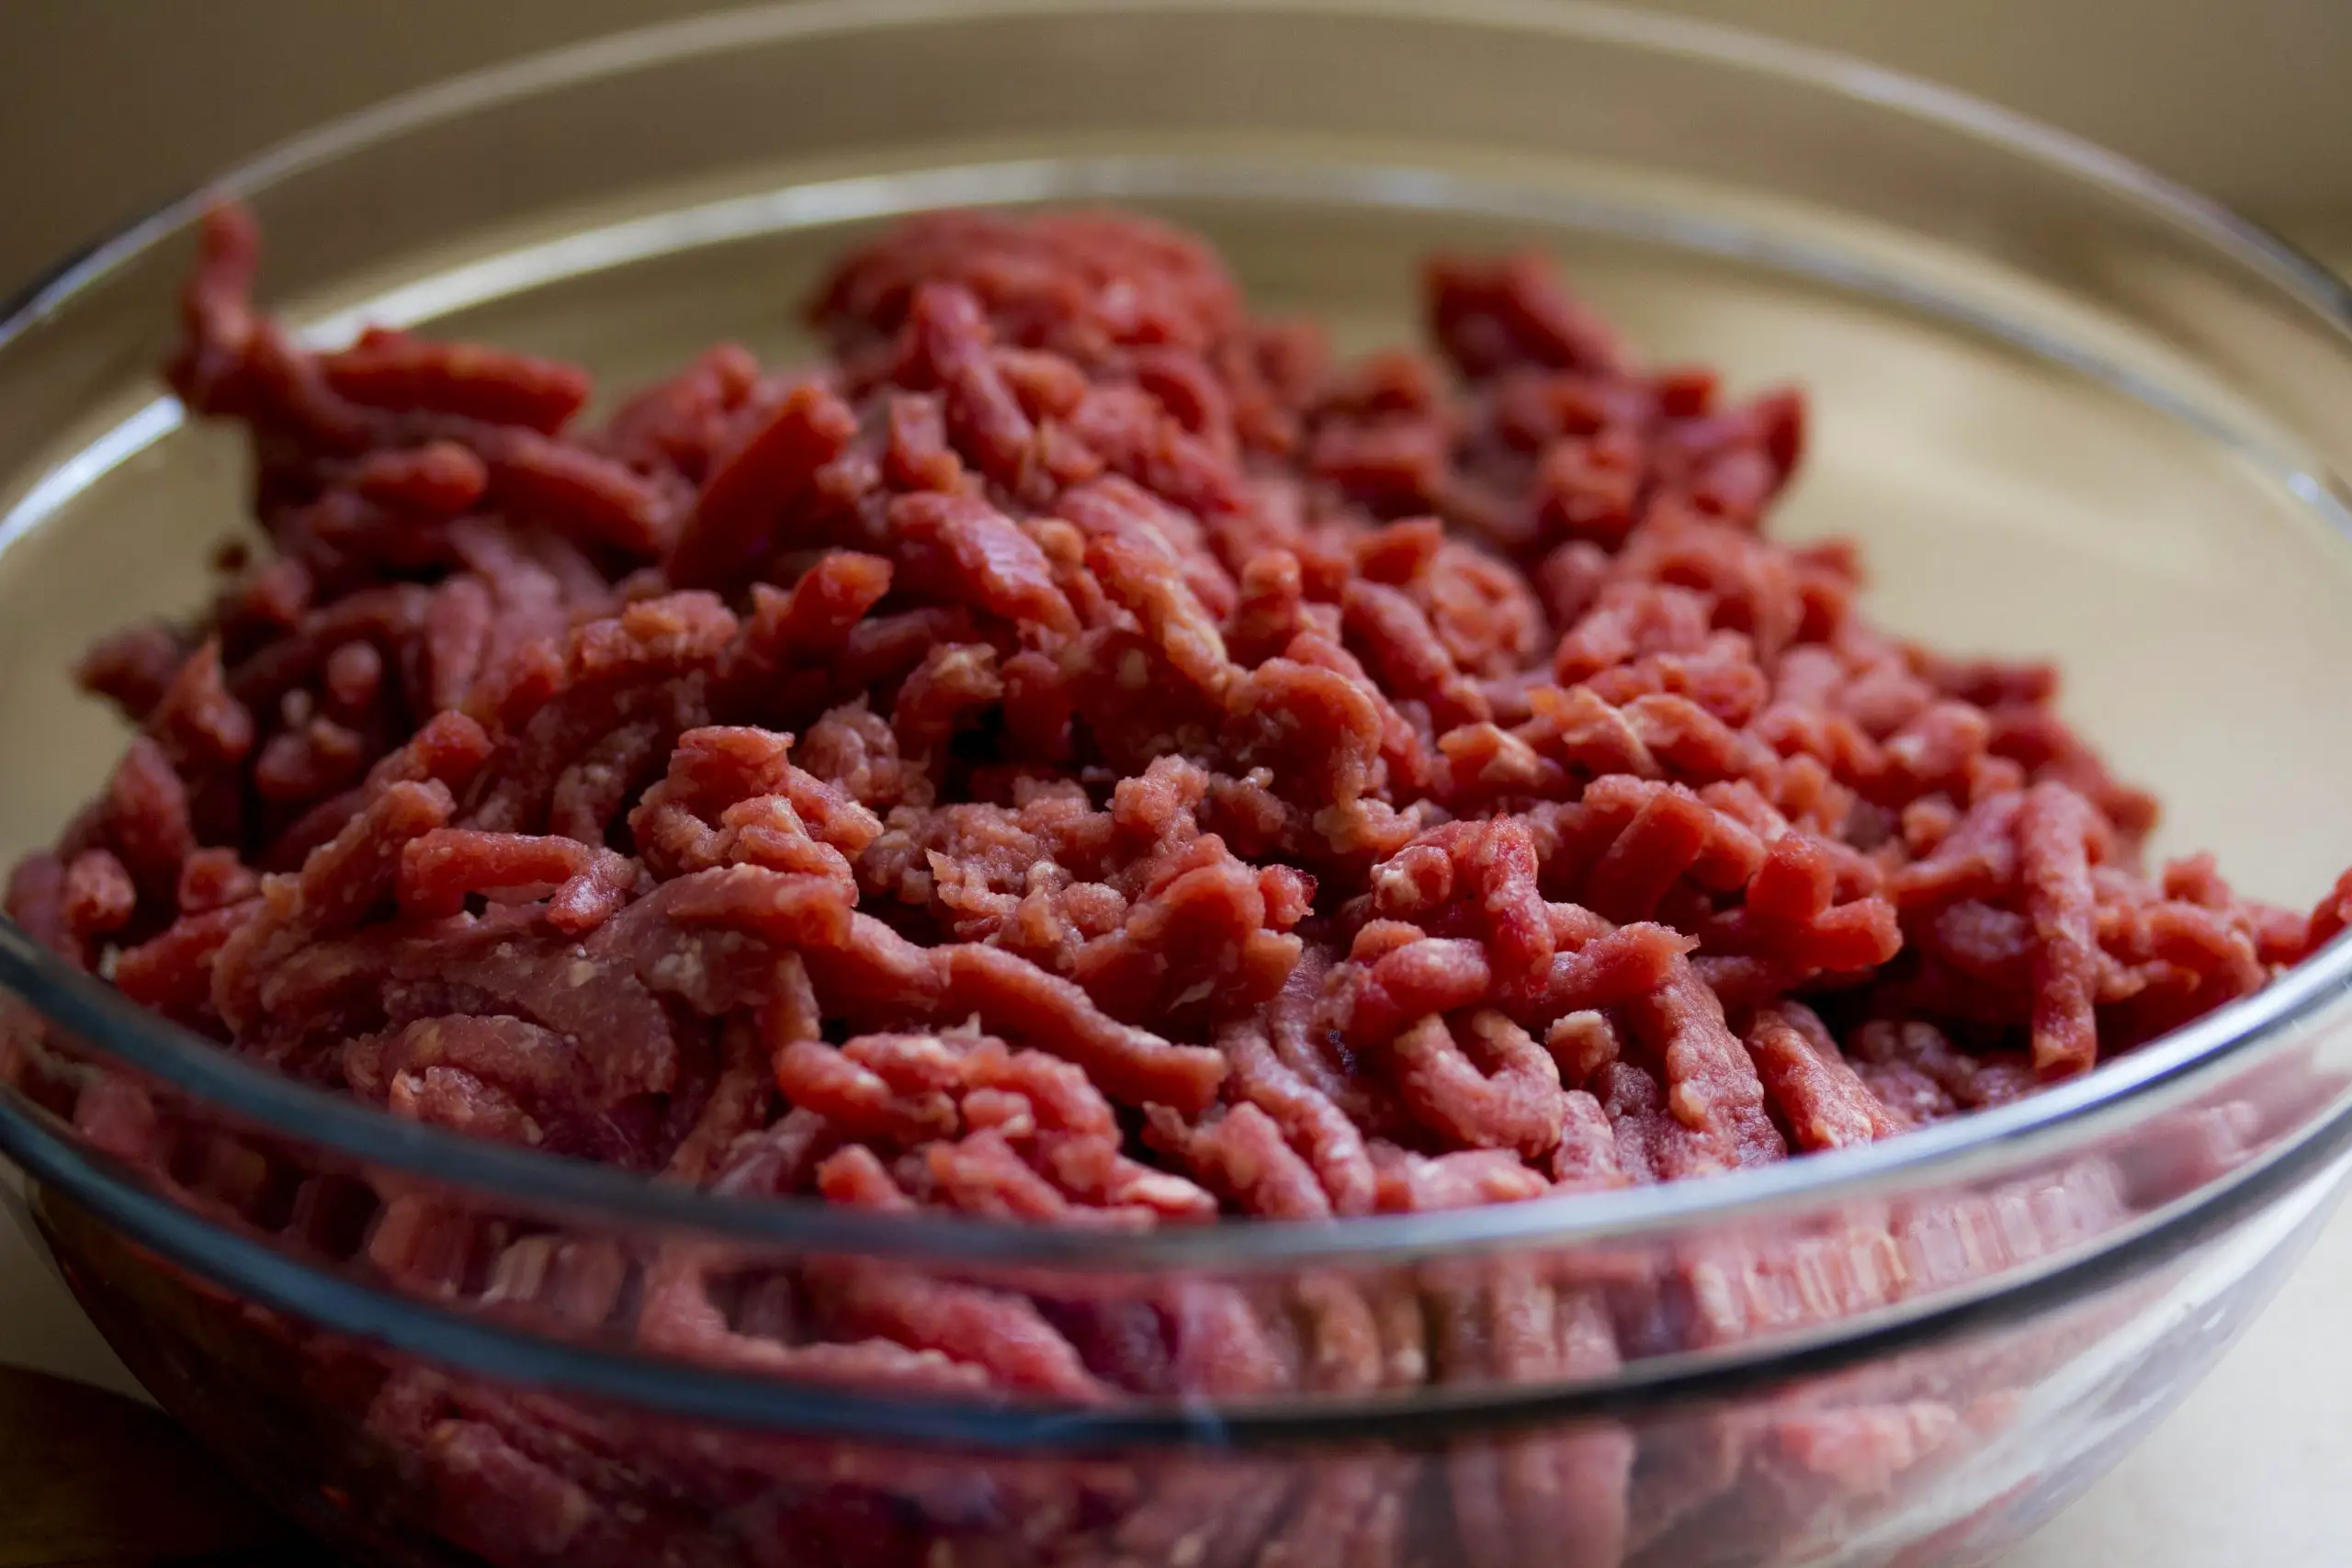 How Long Does Raw Ground Beef Last in the Fridge